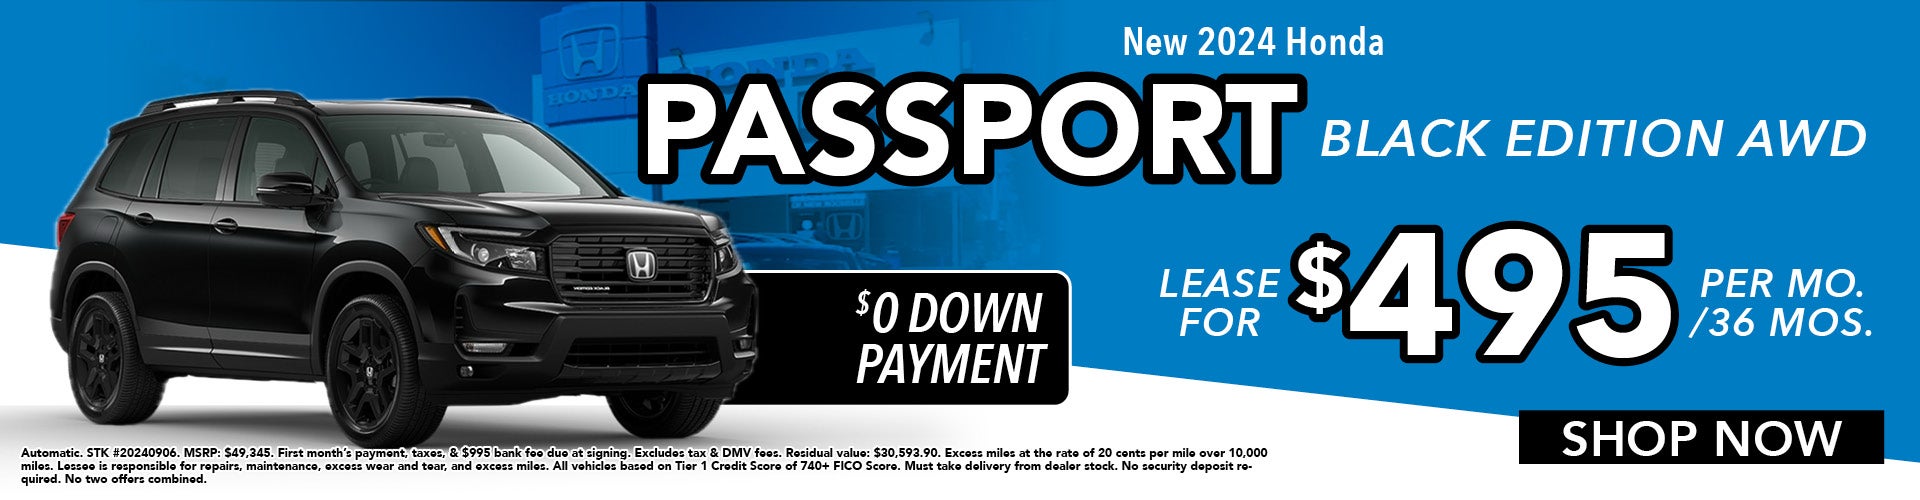 Lease a 2024 Passport Black Edition at Honda of New Rochelle